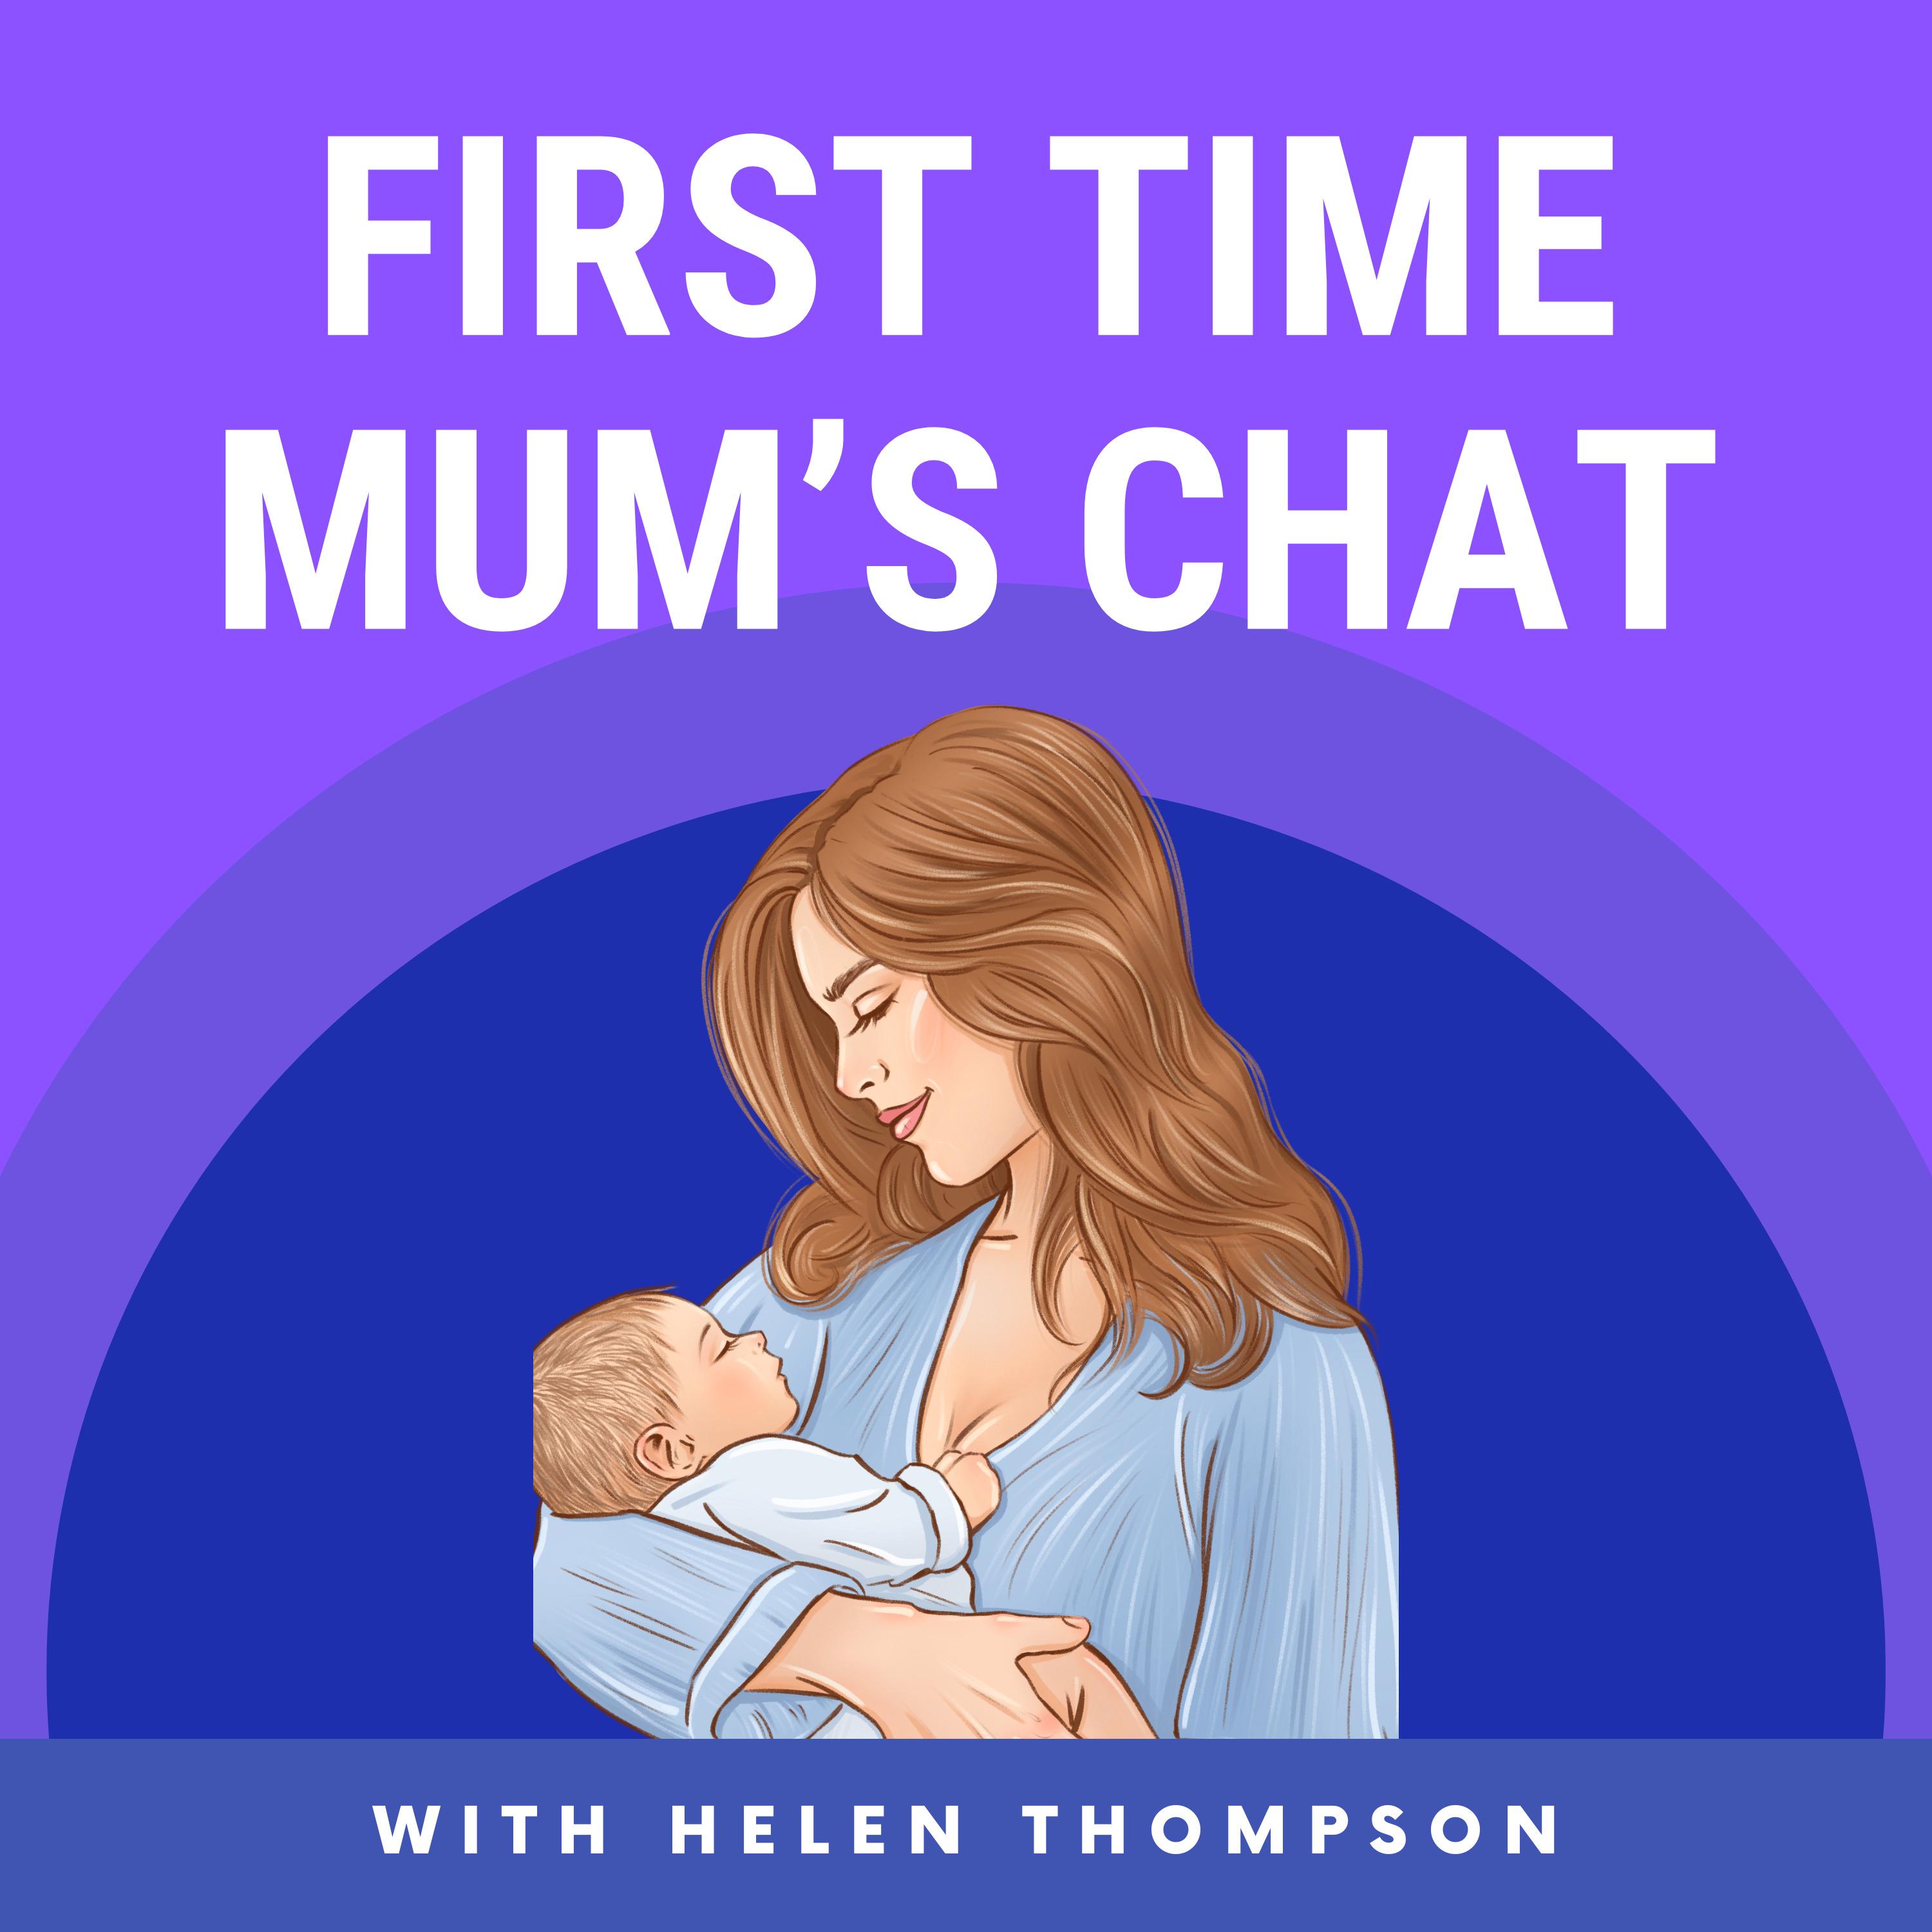 First Time Mum's Chat